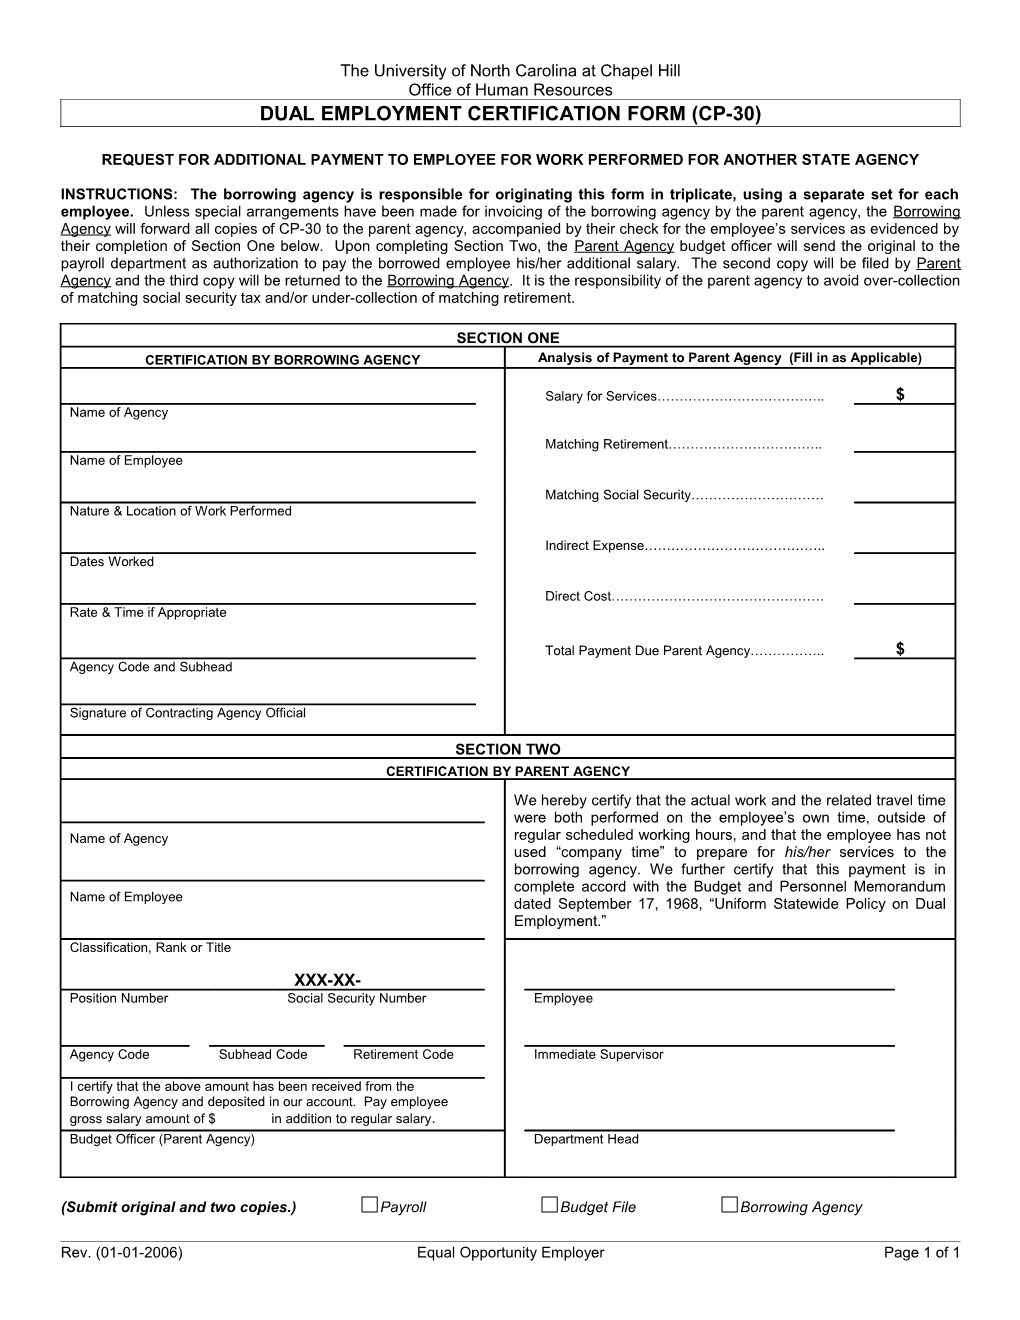 Dual Employment Certification Form (CP-30)